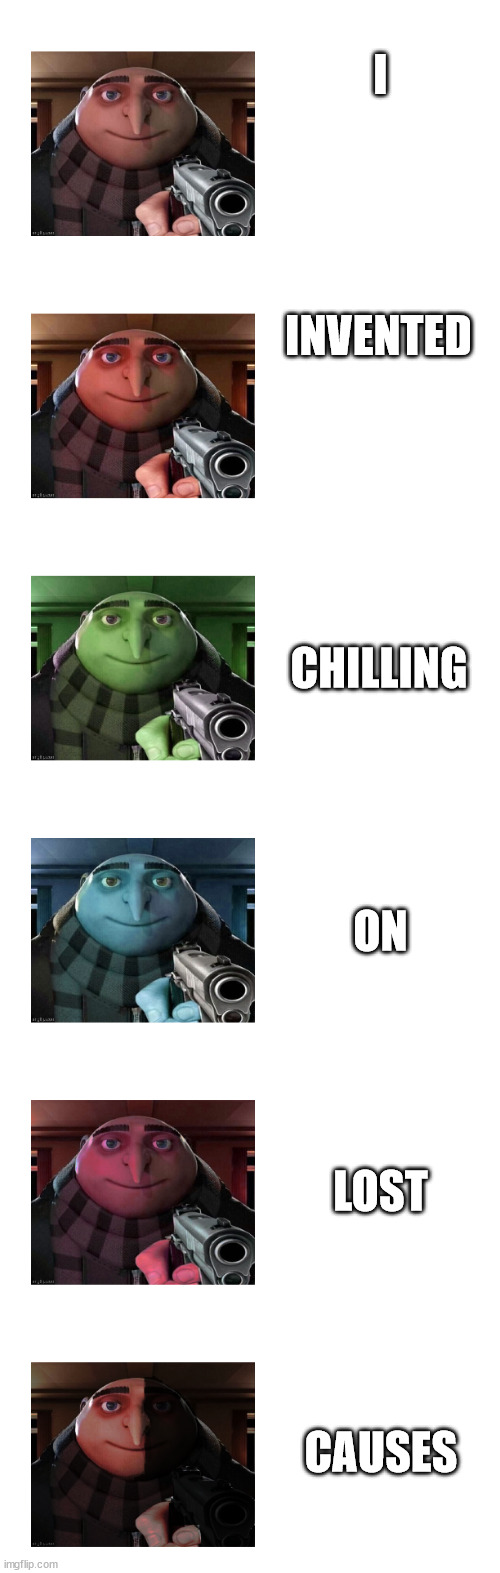 Into The Gun-Gru Verse | I INVENTED CHILLING ON LOST CAUSES | image tagged in into the gun-gru verse | made w/ Imgflip meme maker